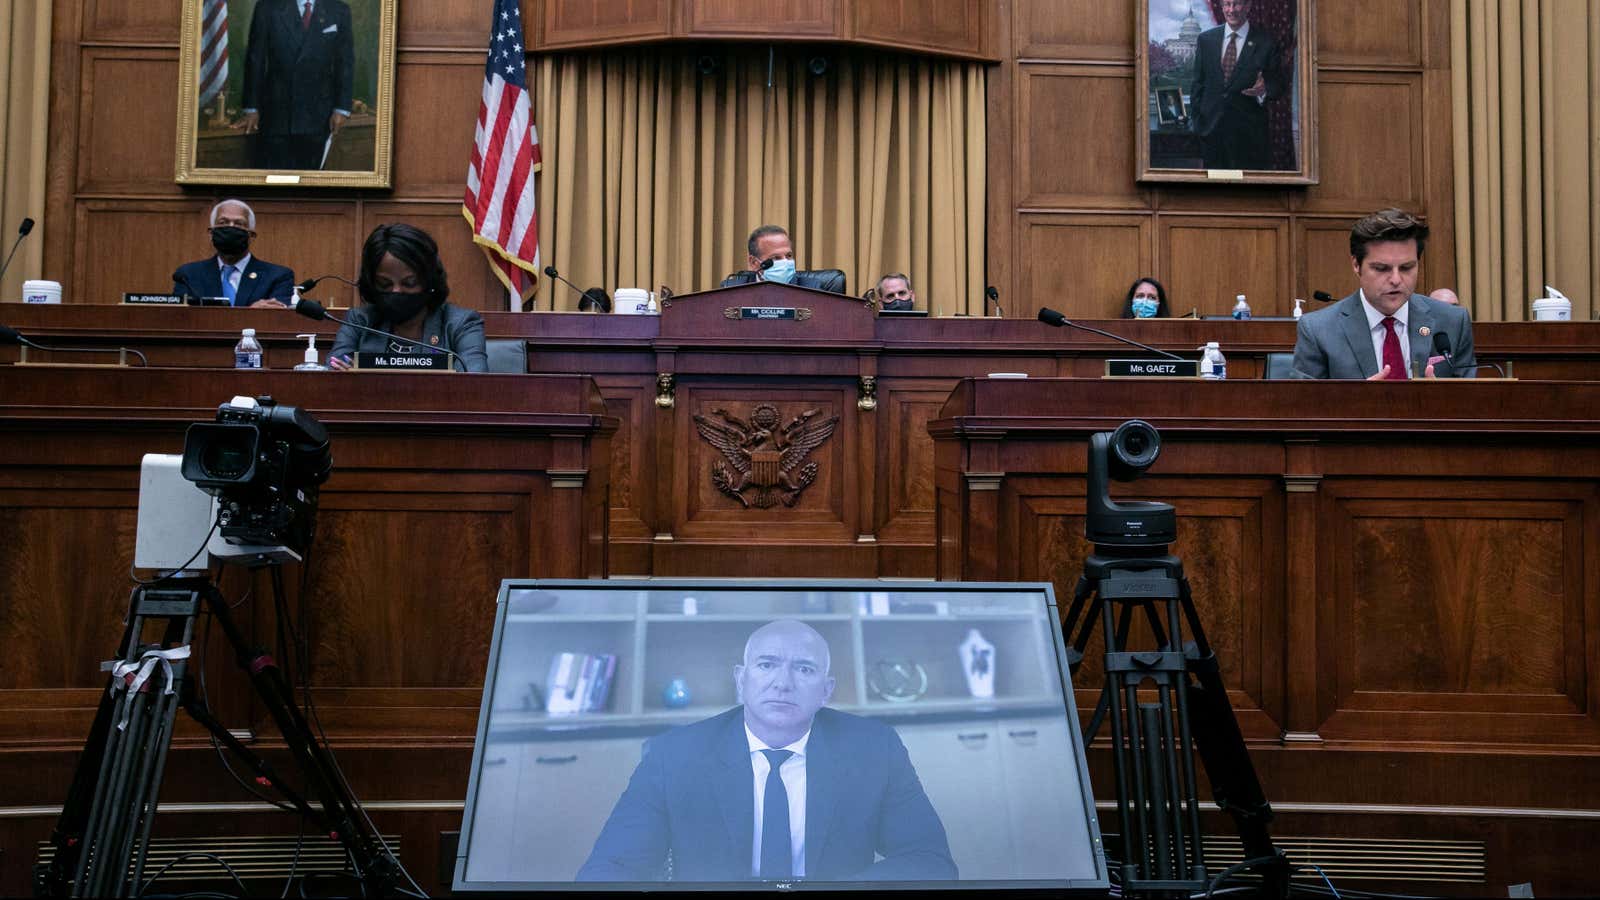 Amazon CEO Jeff Bezos speaks via video conference during a hearing of the House Judiciary Subcommittee on Antitrust, Commercial and Administrative Law.